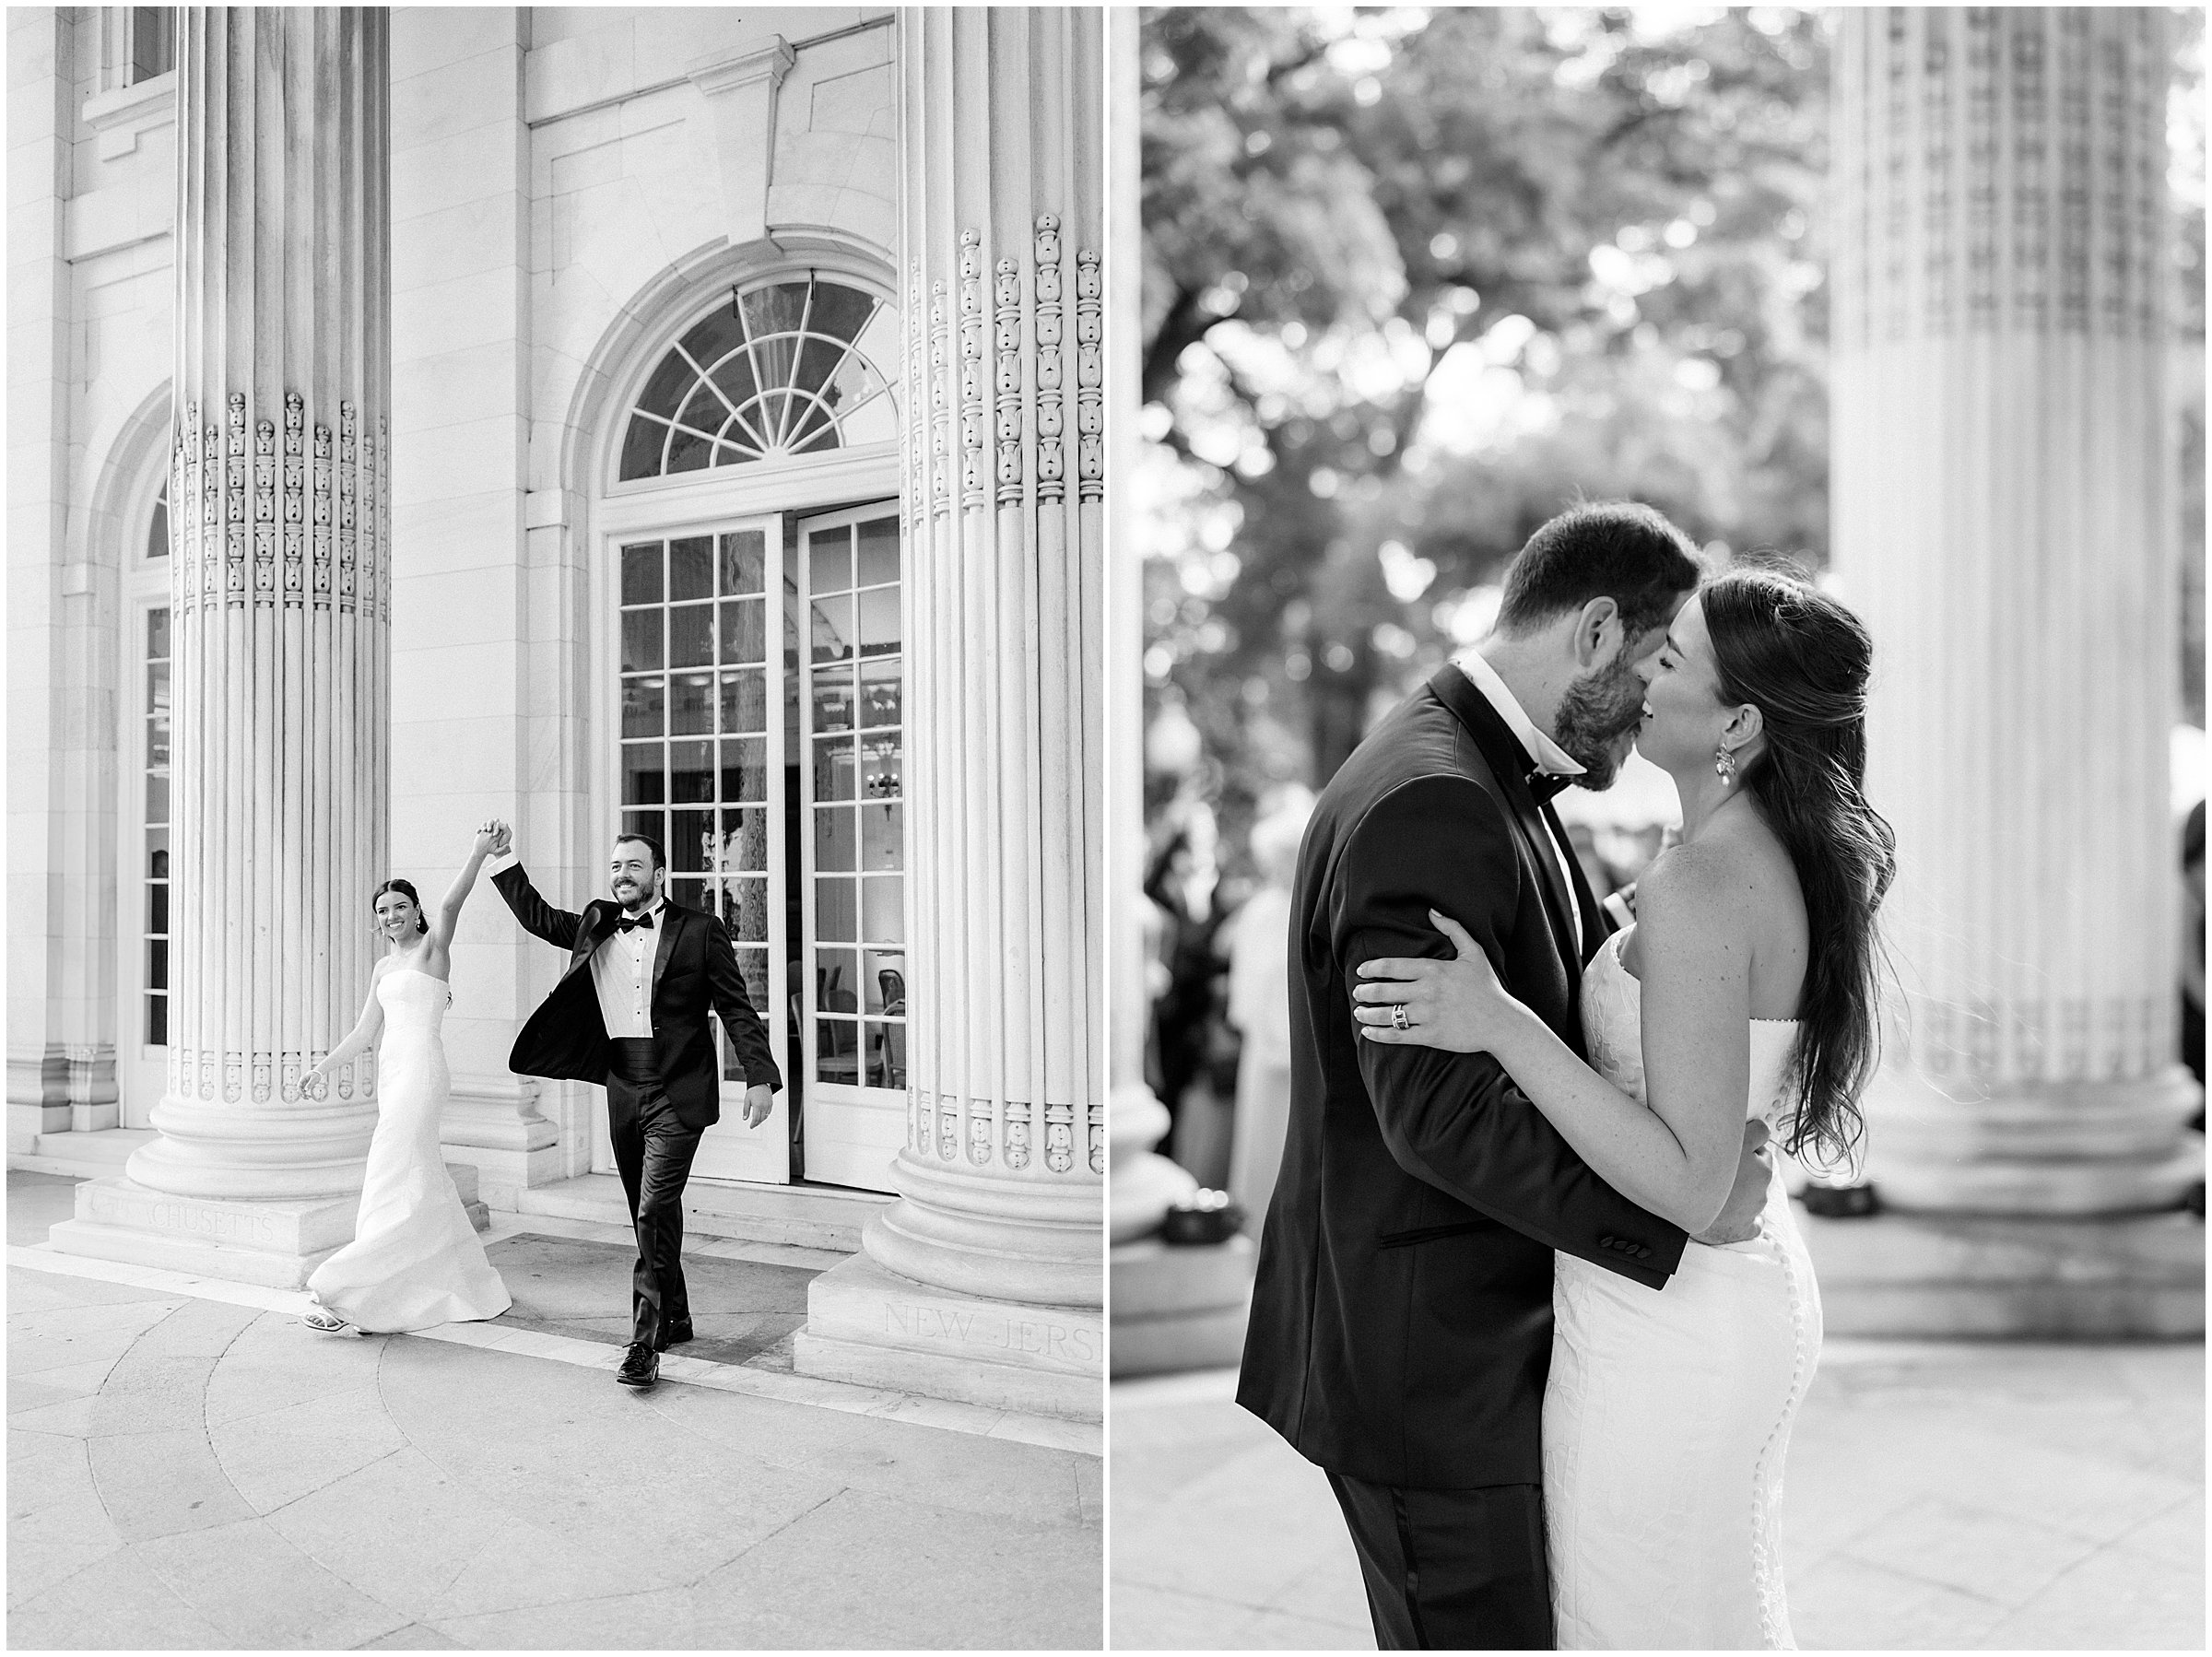 First dance under the portico at DAR Constitution Hall